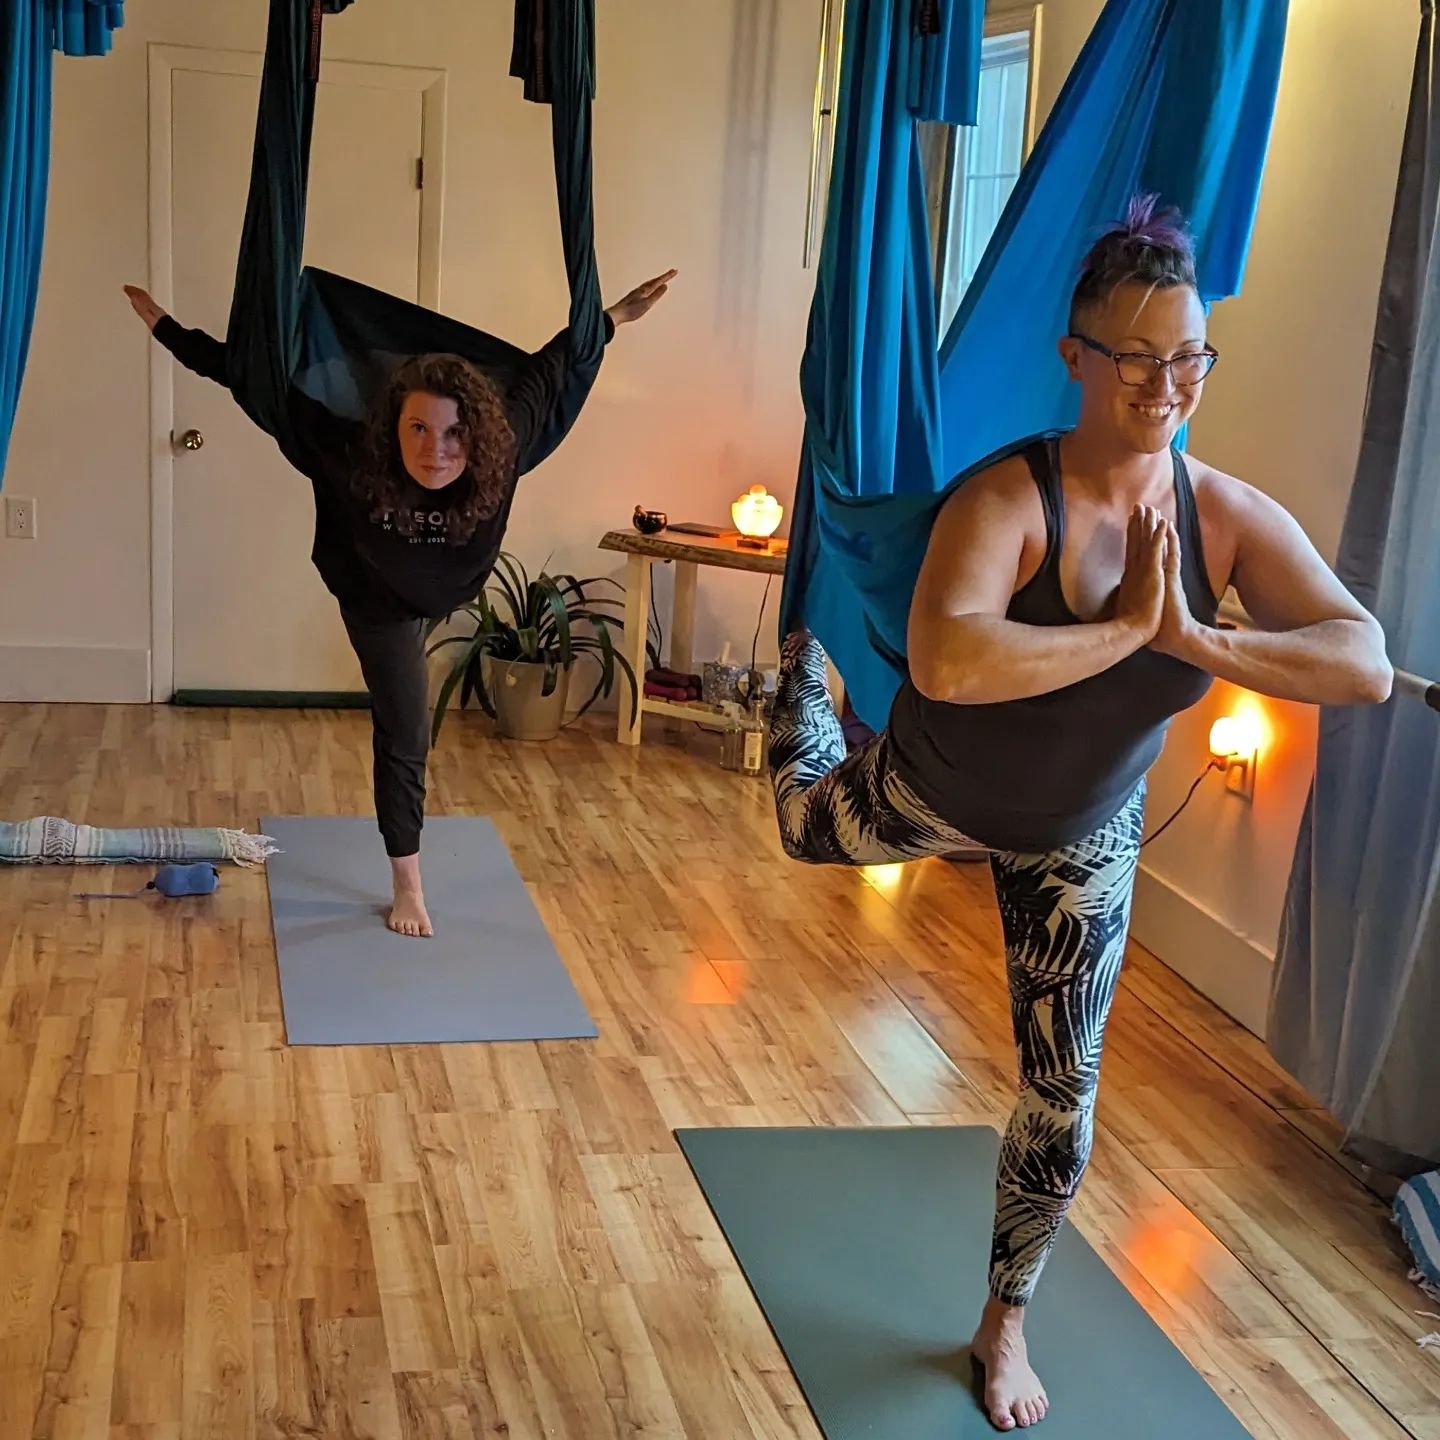 Aerial with us! Friday 7 am ( RSVP by midnight) Friday 430 pm,
Sat 10 am, Sun 930 am &amp;
Aerial Earth 4 pm Sun April 14th 🌎

Mom 530 pm, Tues 430 pm, Wed 930 am (no class April 17th due to private event), Wed 530 pm, Thurs 530 pm &amp;
Aerial Blis